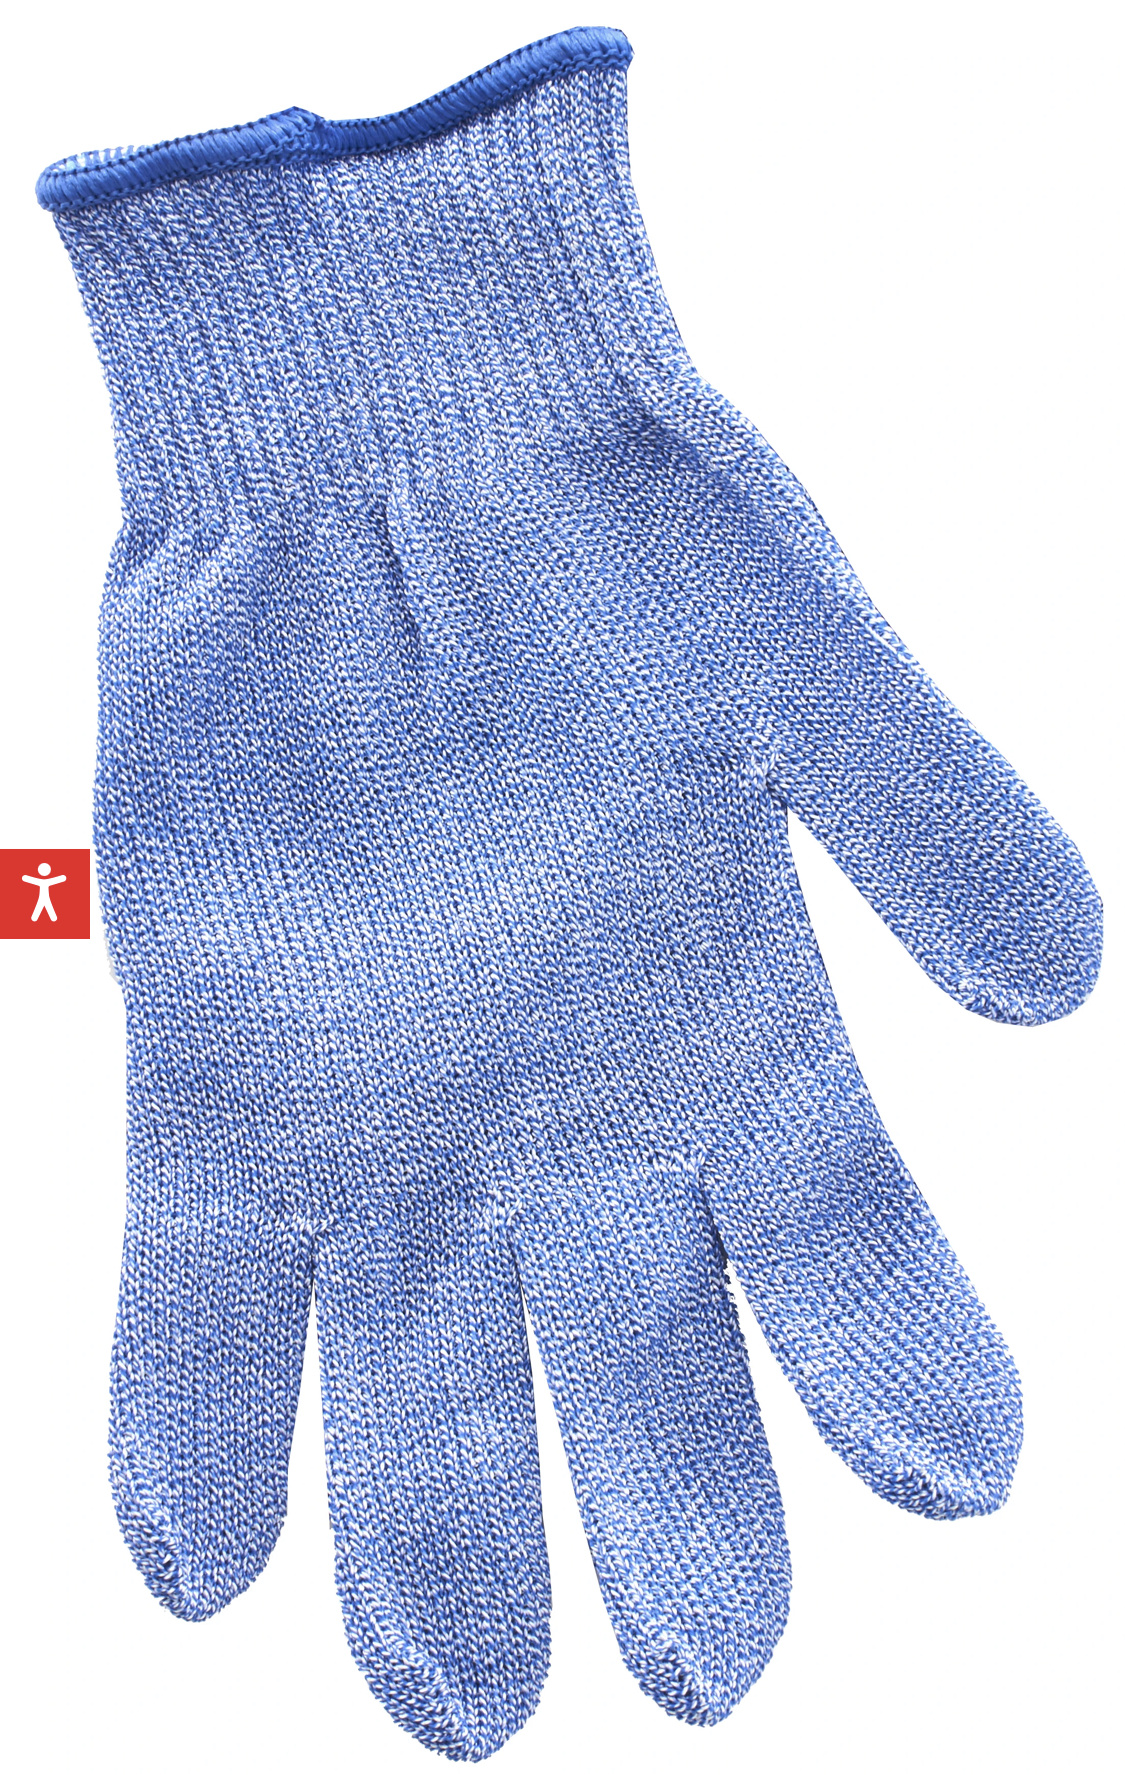 Wusthof Cut Resistant Glove Small